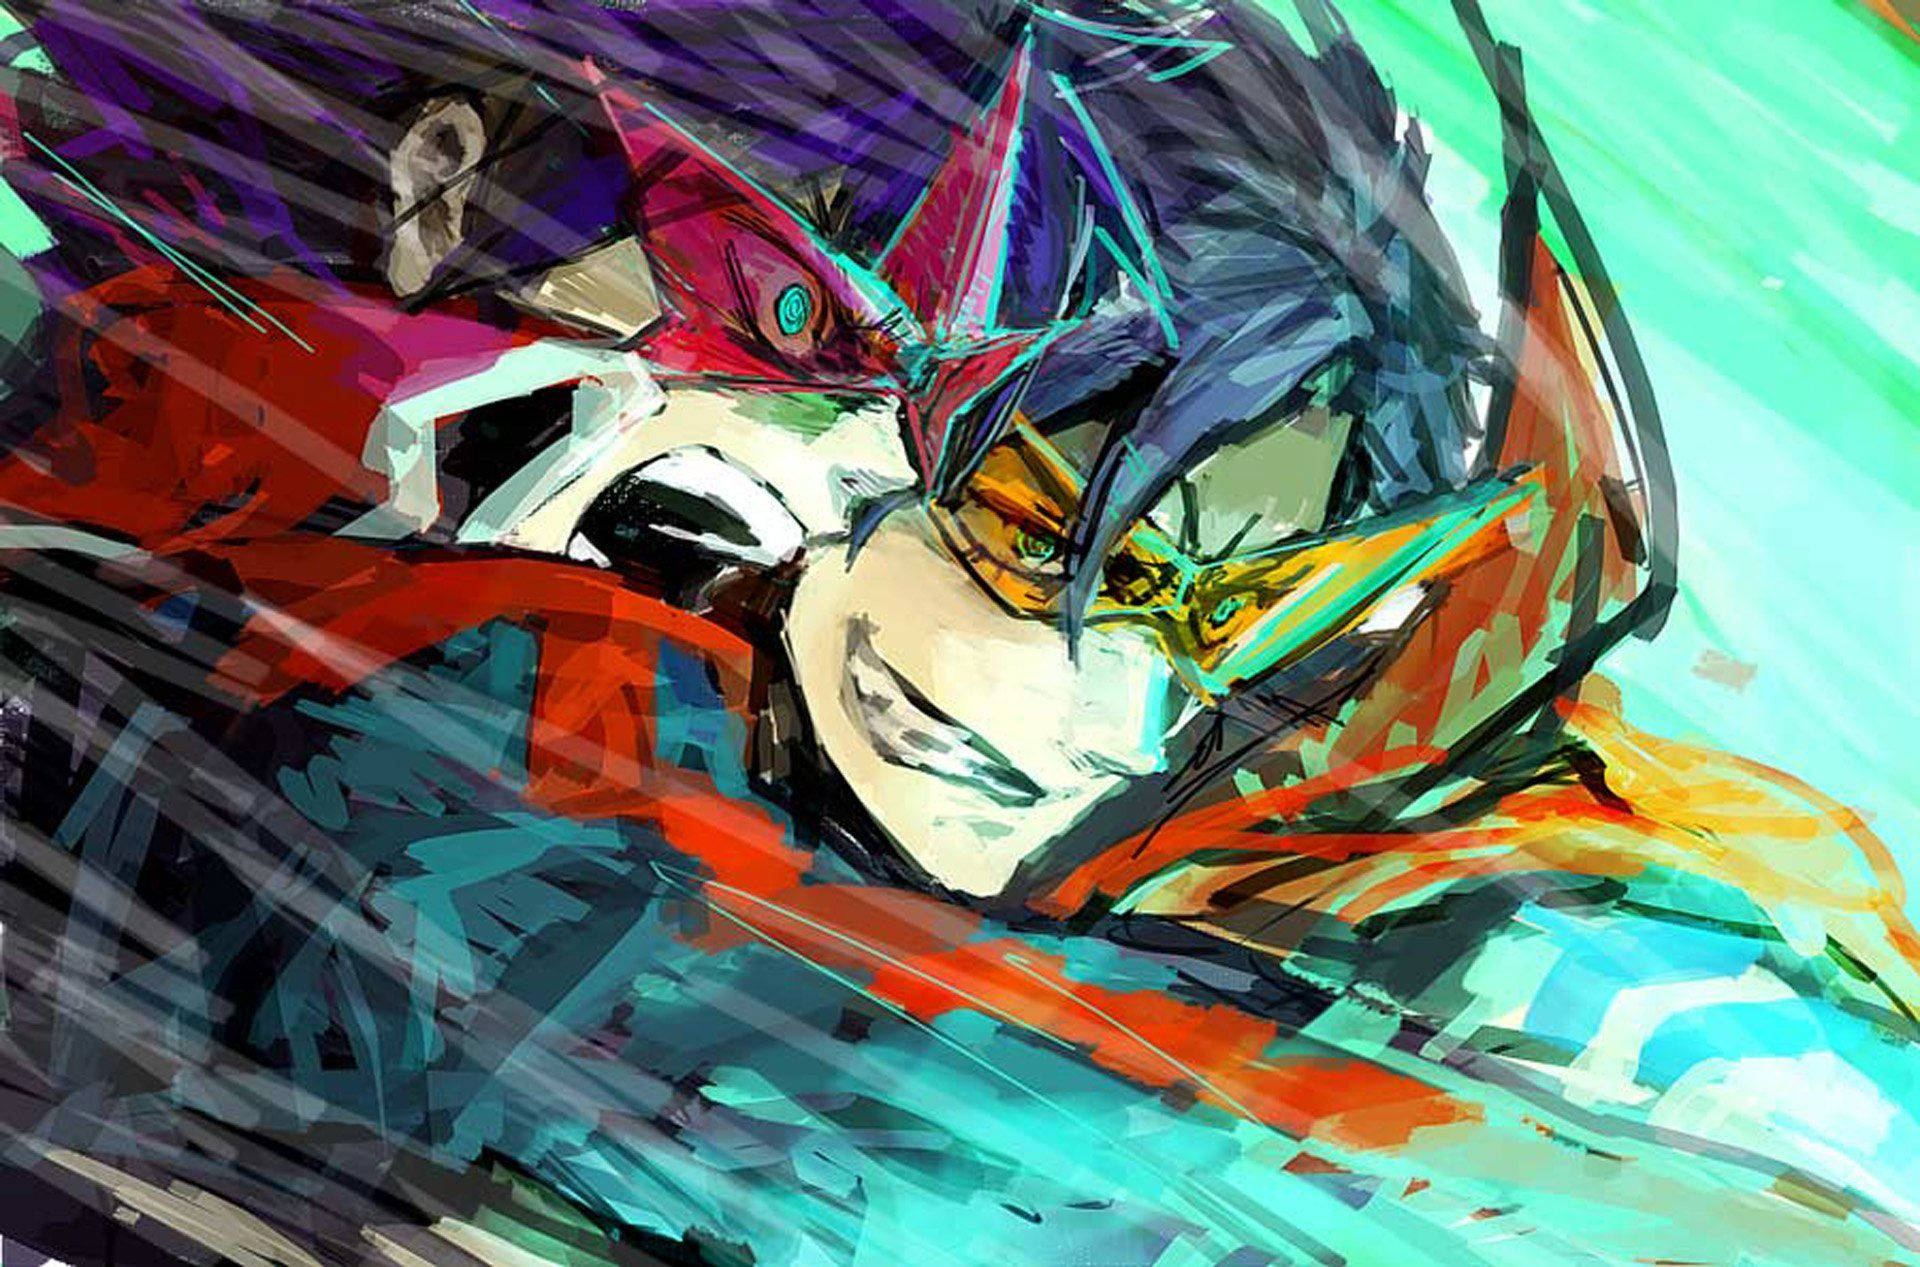 Simon and Kamina, two of Gurren Lagann's most iconic characters Wallpaper